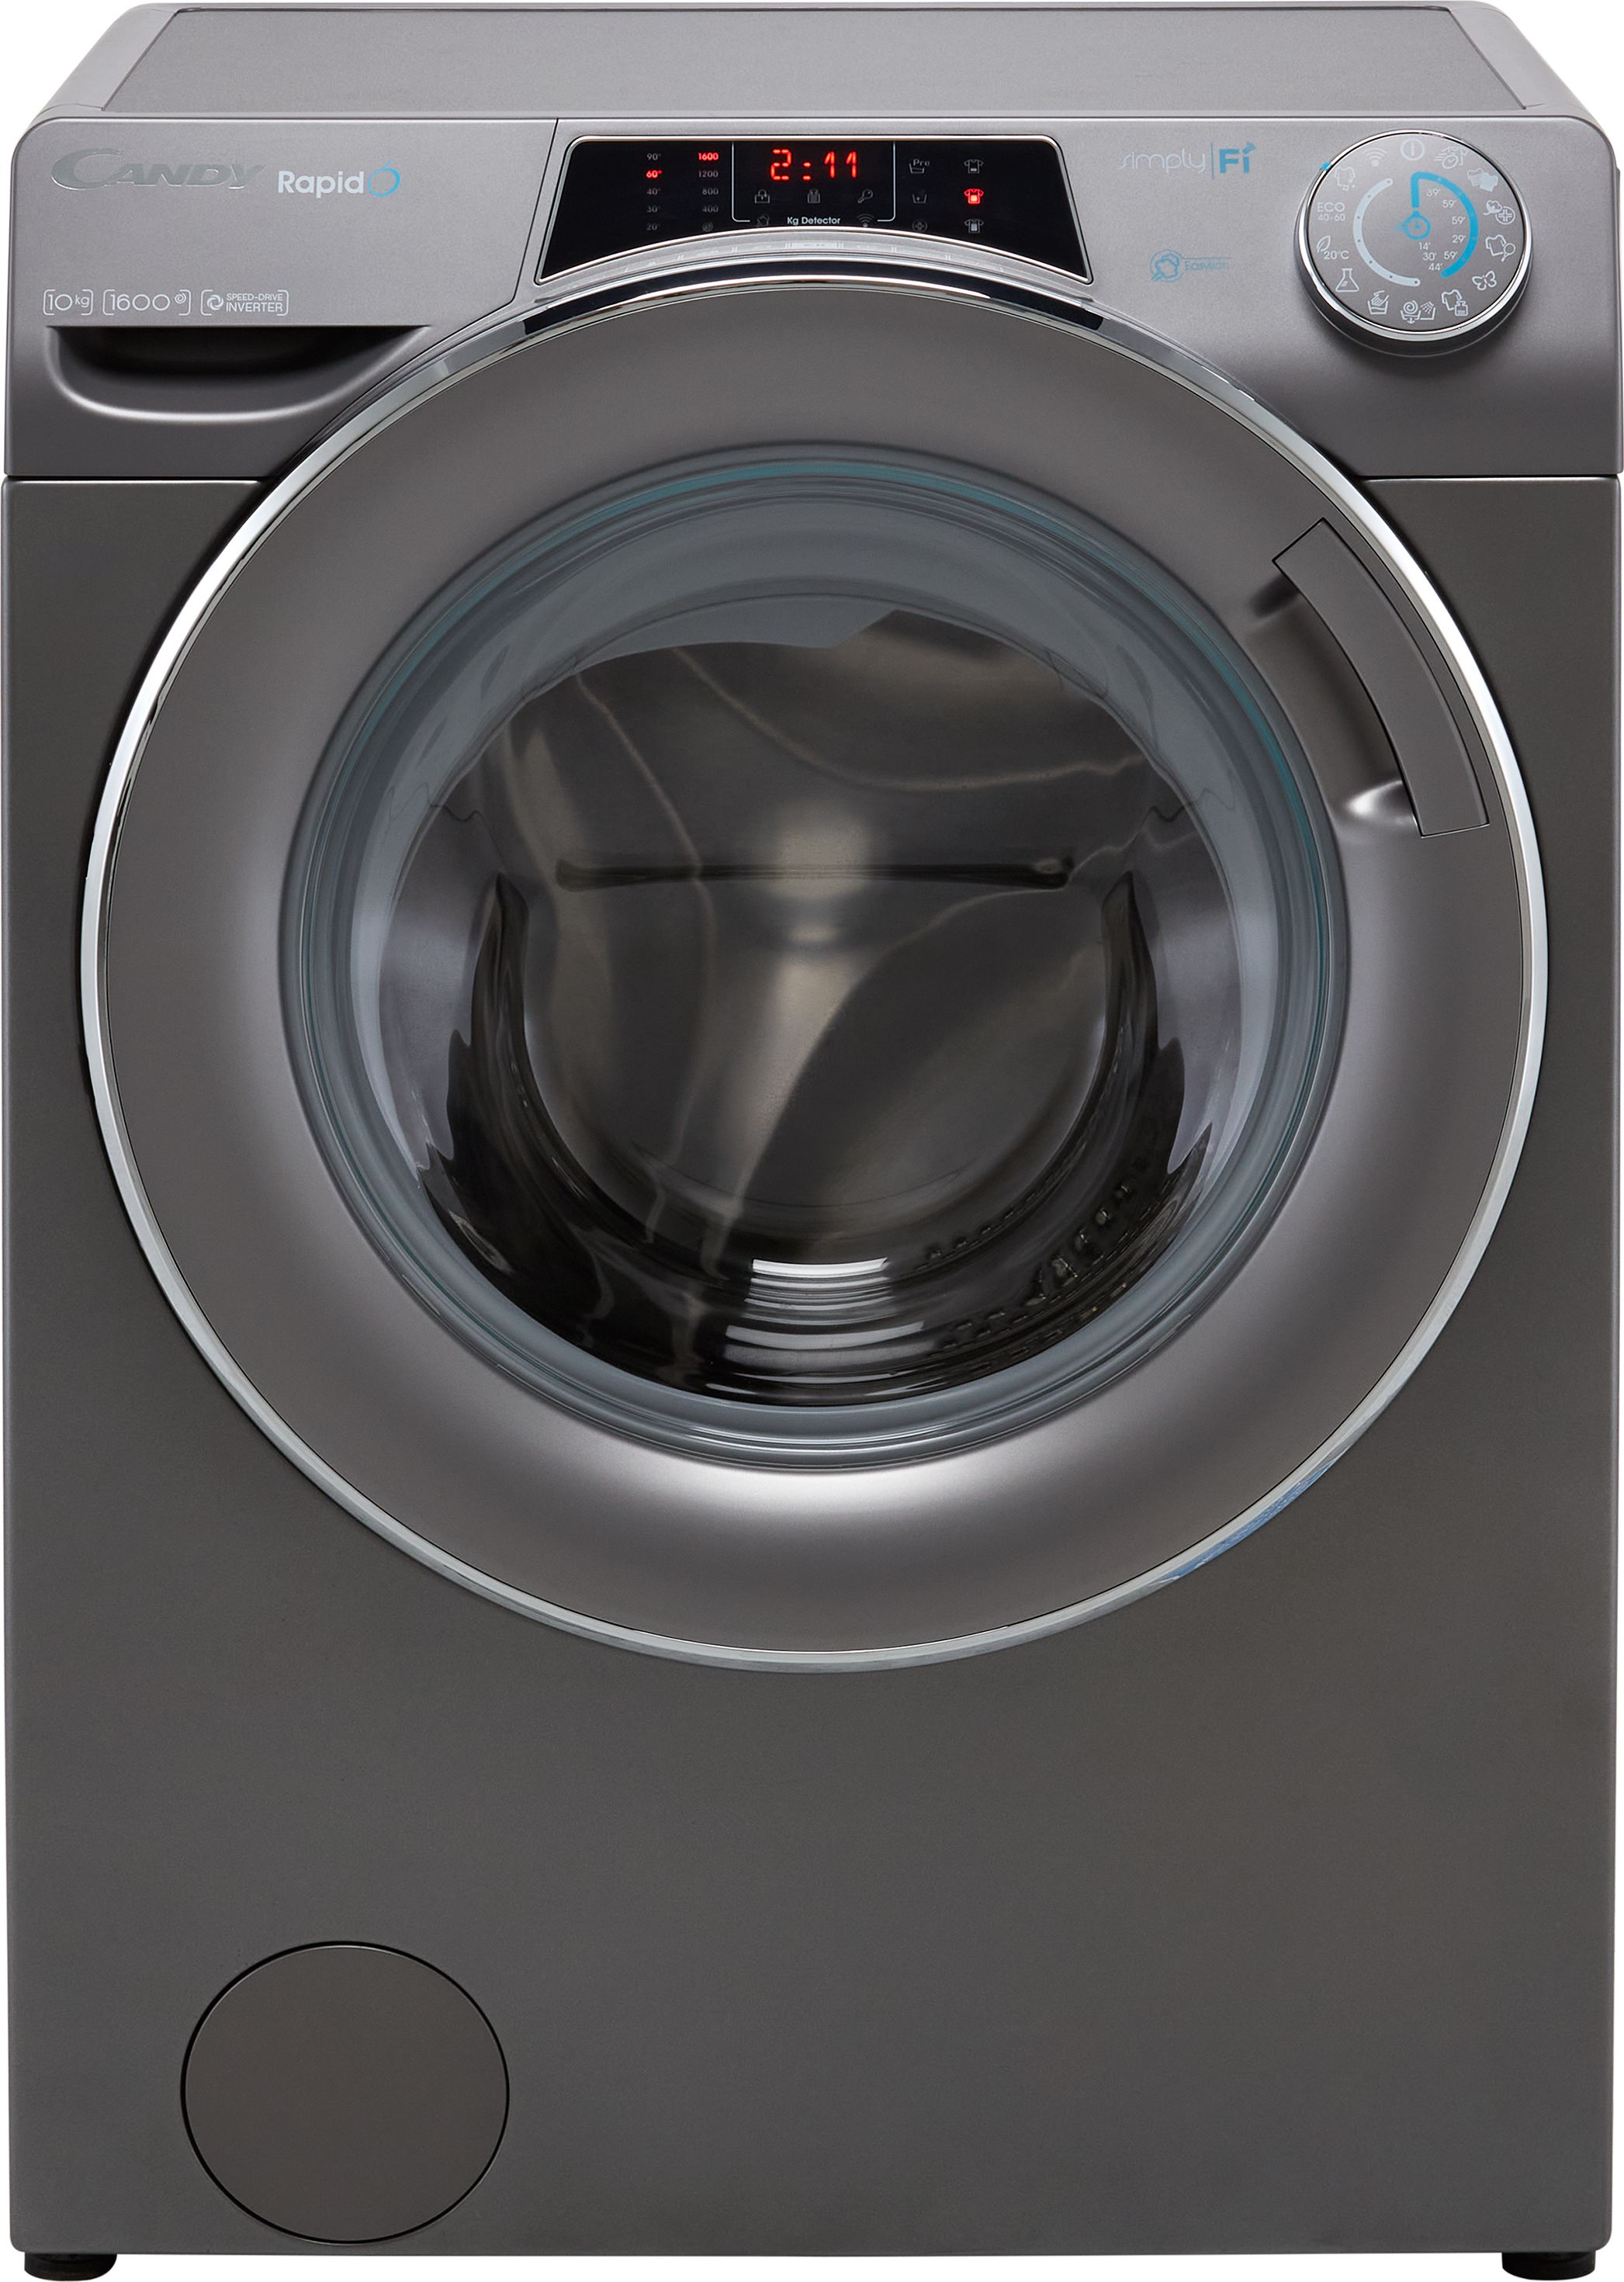 Candy Rapid RO16106DWMCRE 10kg Washing Machine with 1600 rpm - Graphite - A Rated, Silver